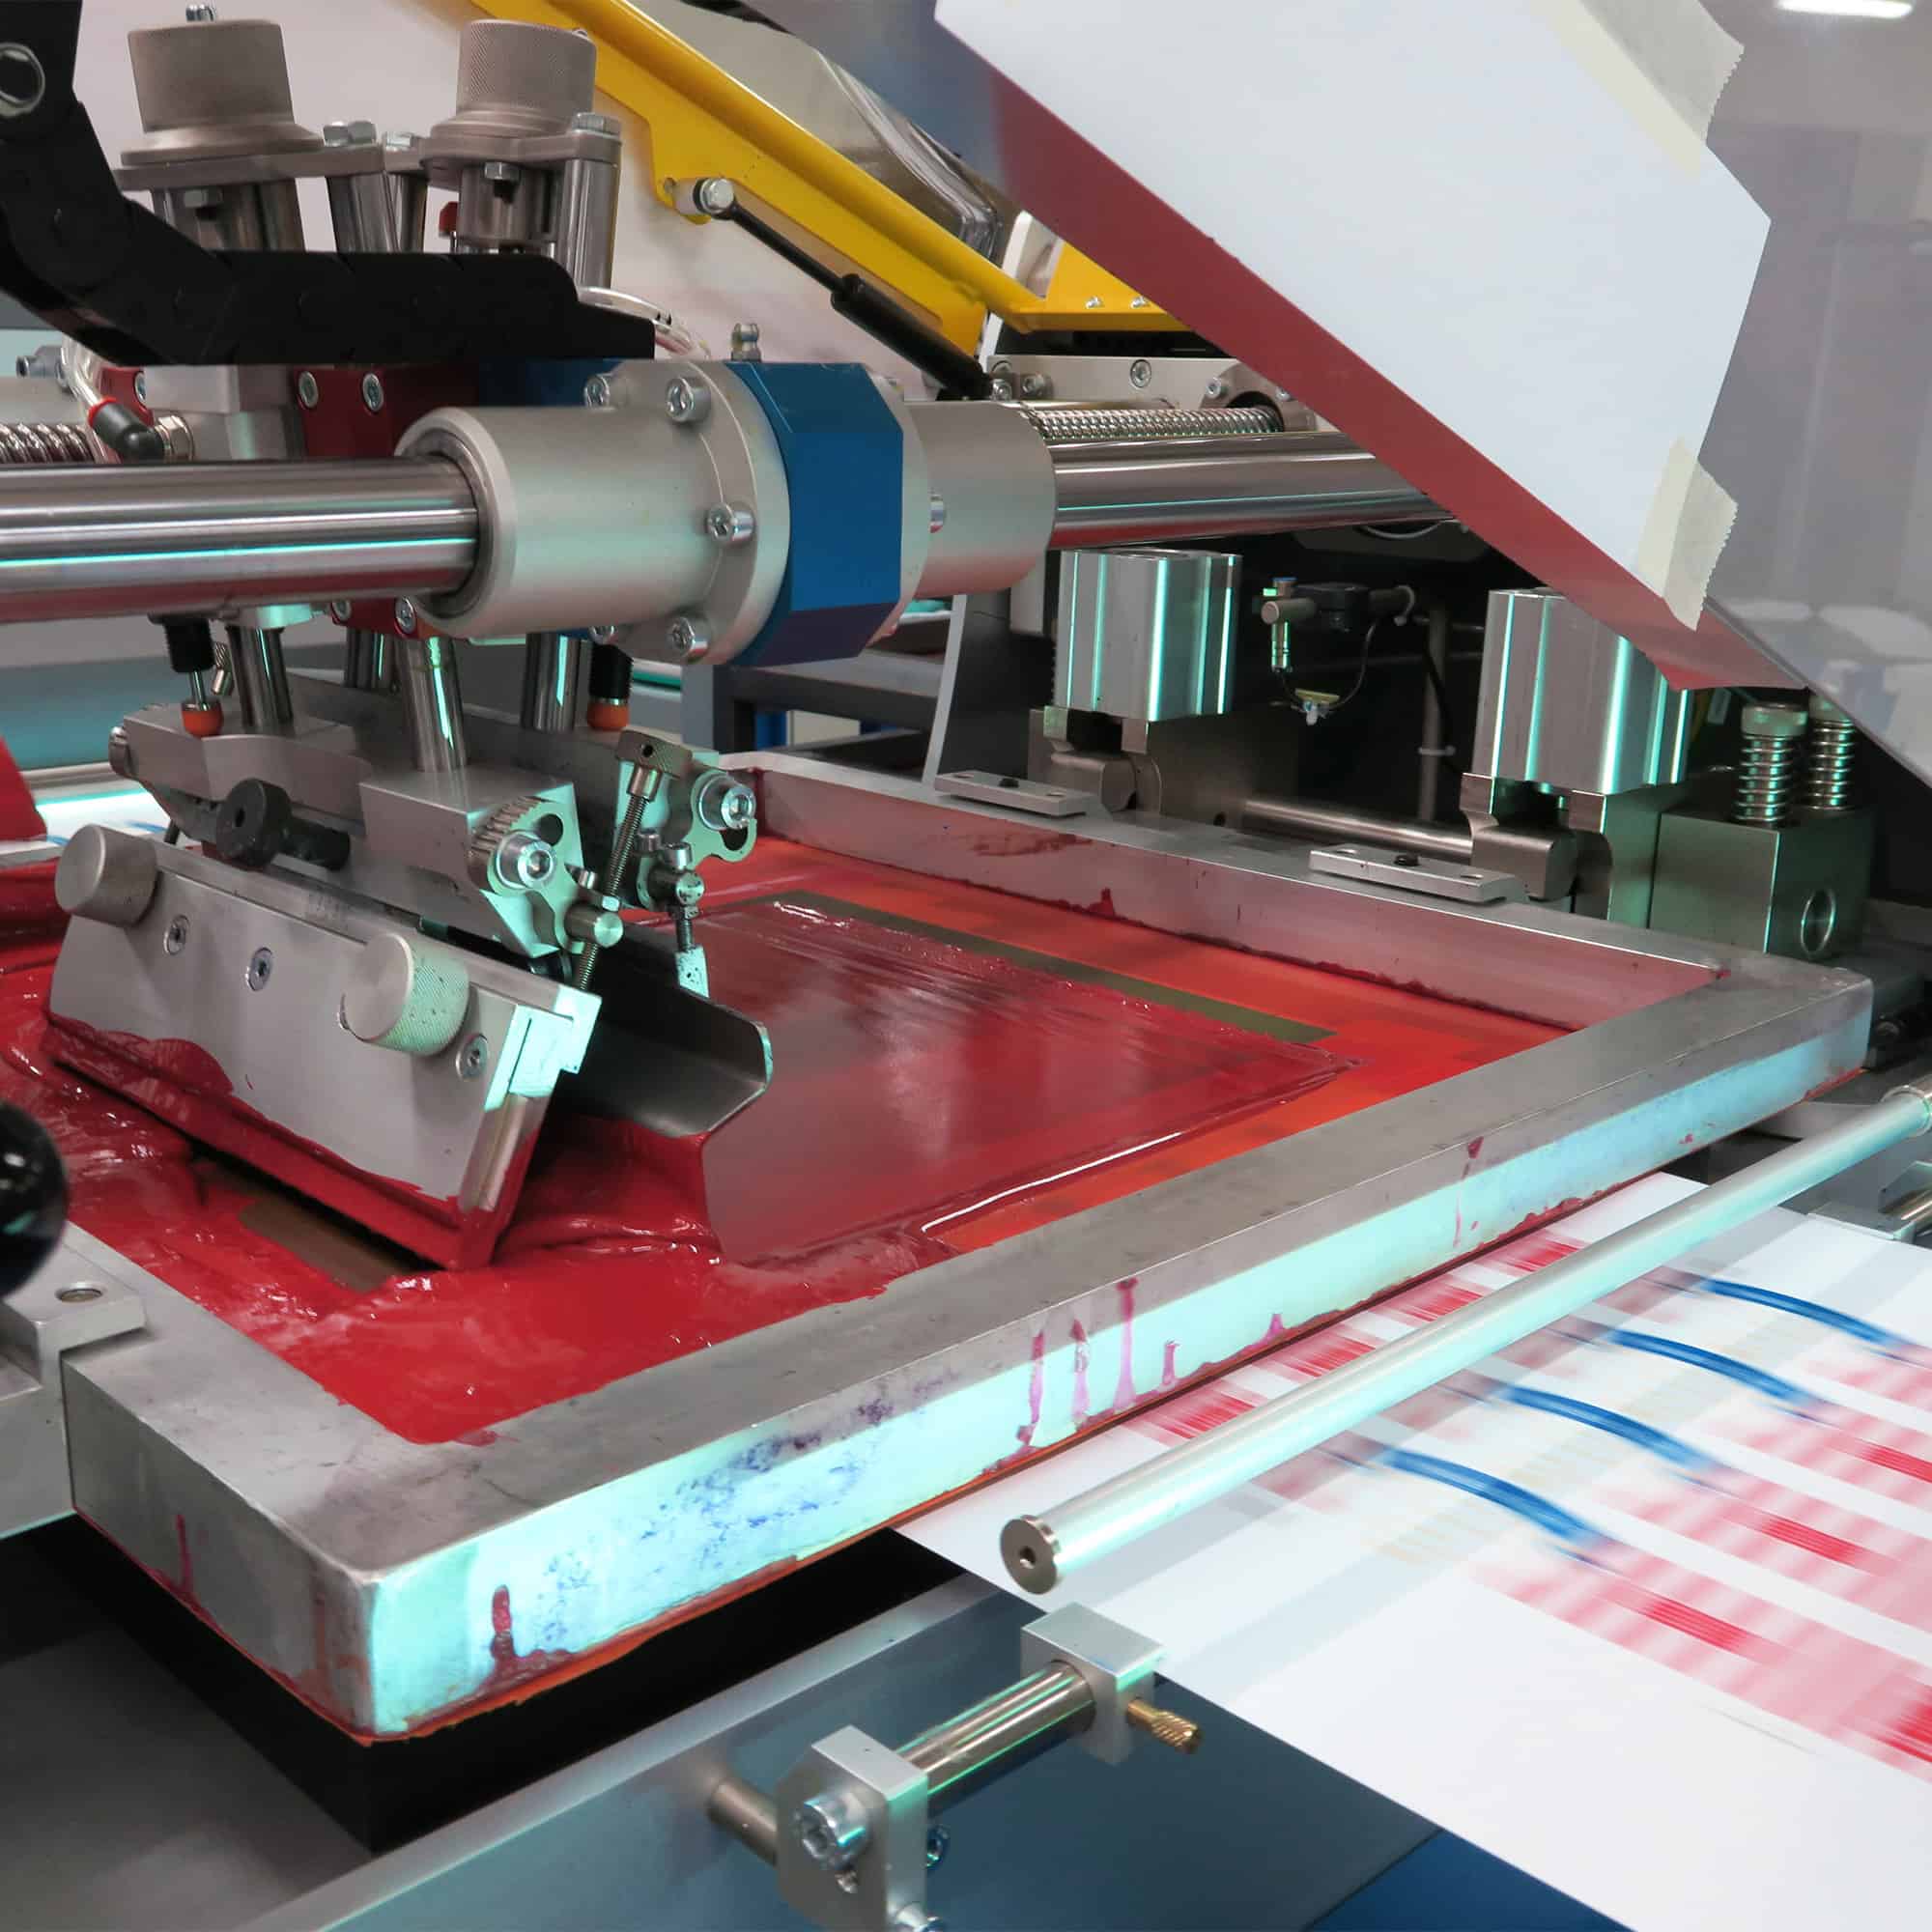 A machine is cutting a red sheet of paper.